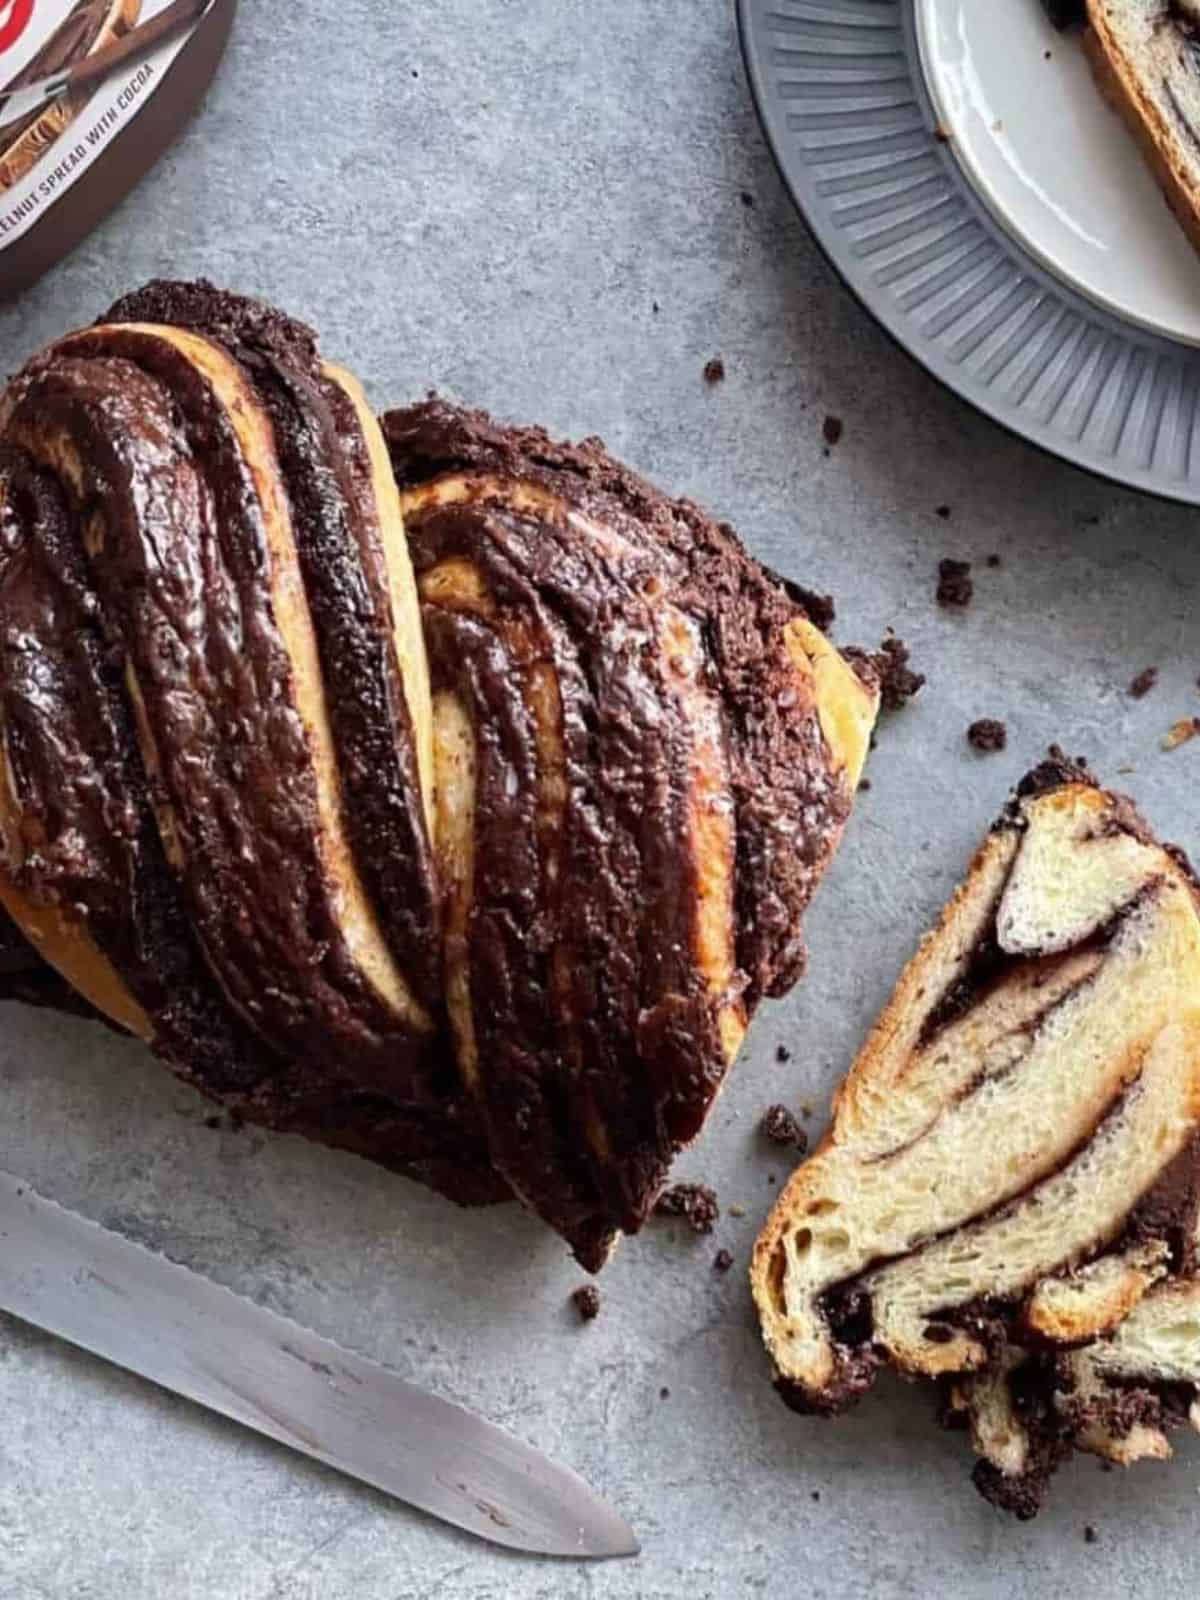 Nutella babka made with a buttery brioche dough wrapped around a smooth chocolate and hazelnut filling.